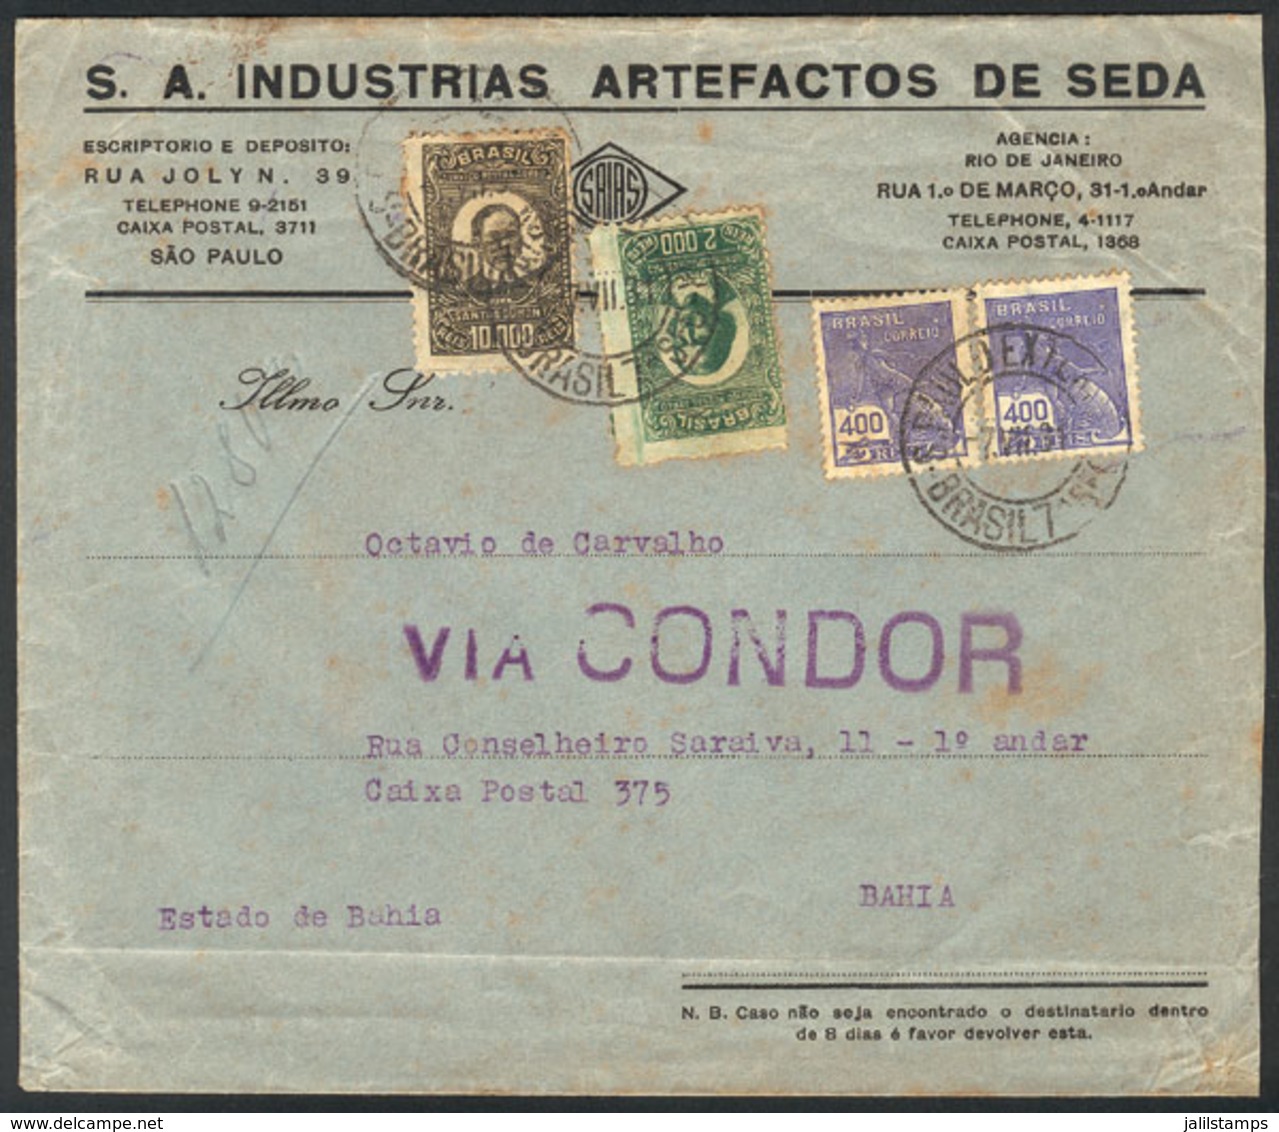 BRAZIL: Airmail Cover Sent From Sao Paulo To Bahia On 7/JUL/1931 Franked With 12,800Rs., Very Nice! - Cartoline Maximum